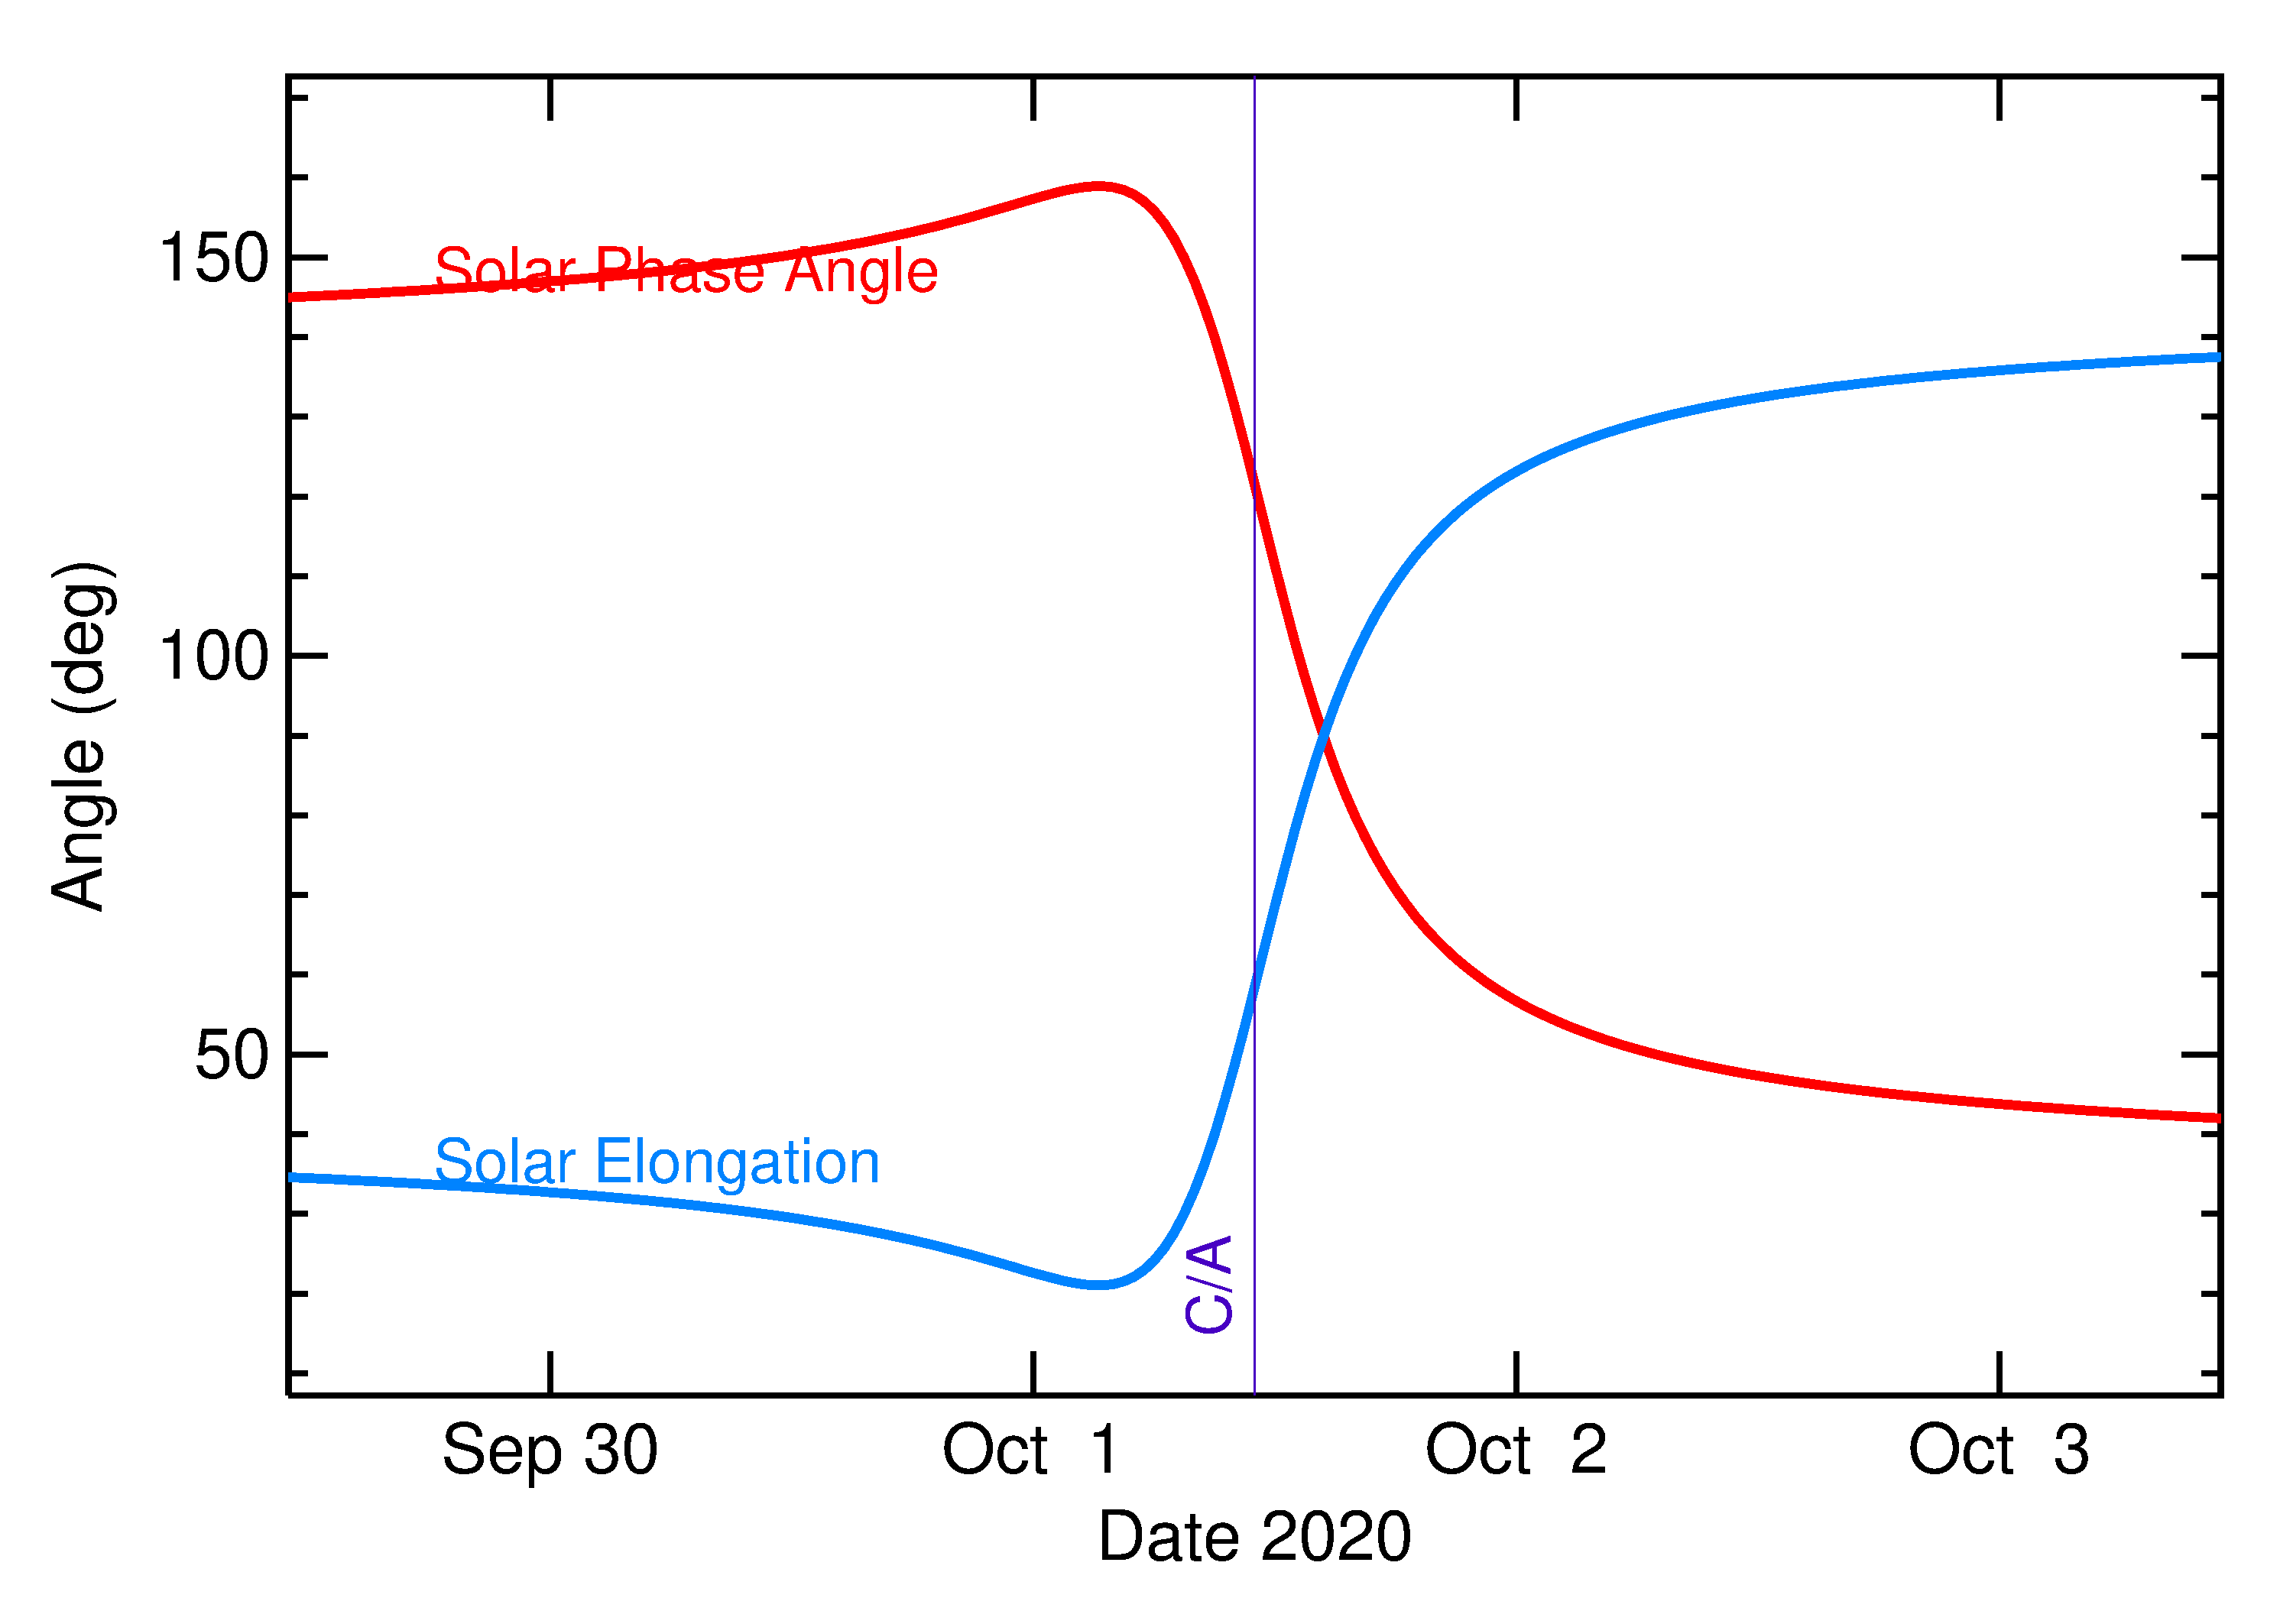 Solar Elongation and Solar Phase Angle of 2020 TA in the days around closest approach